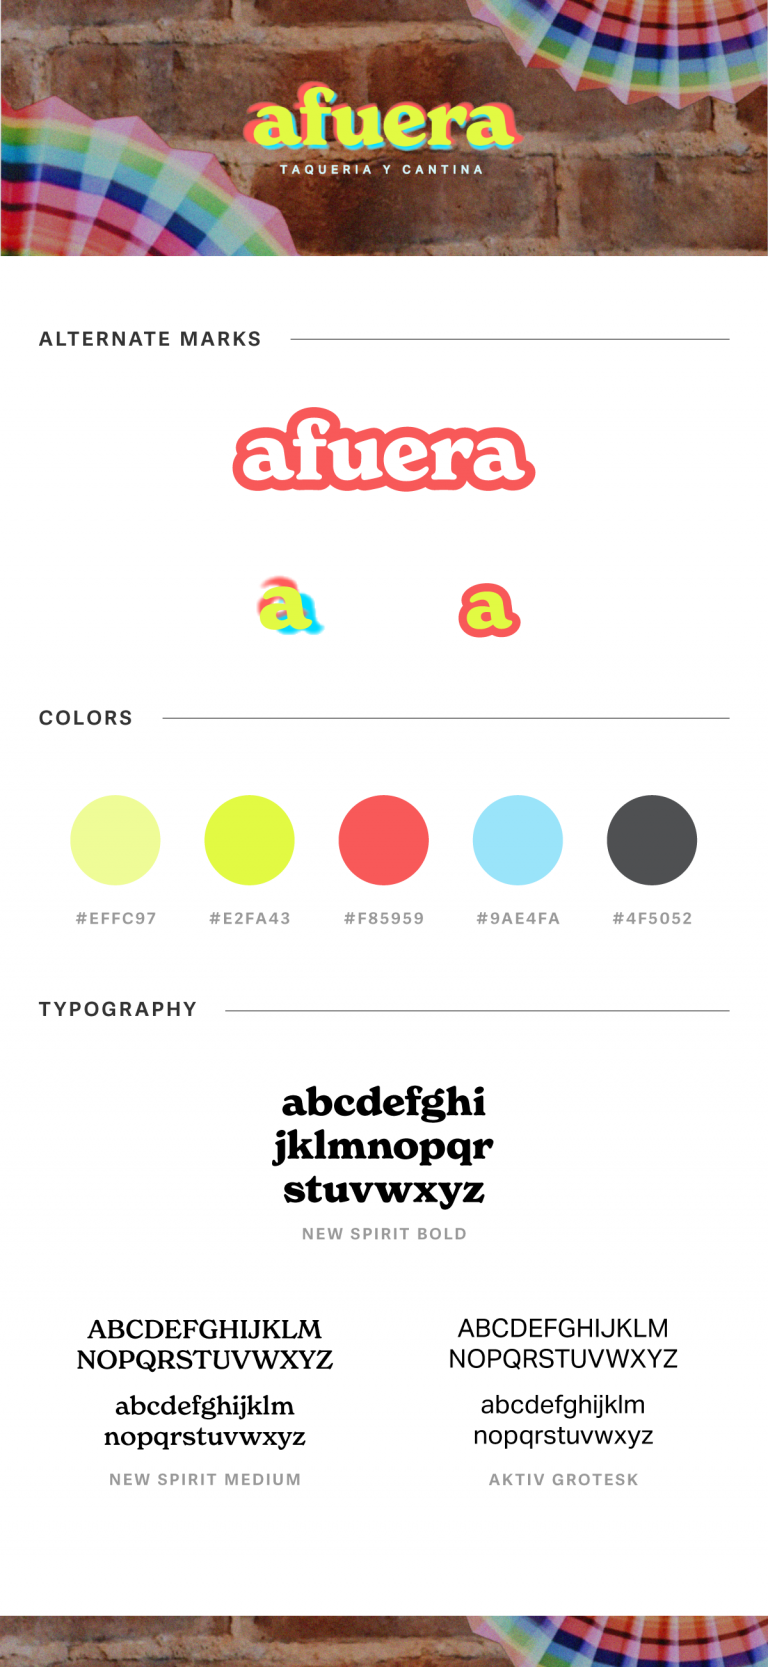 Image showing alternate logos, colors, and typographic choices for Afuera branding